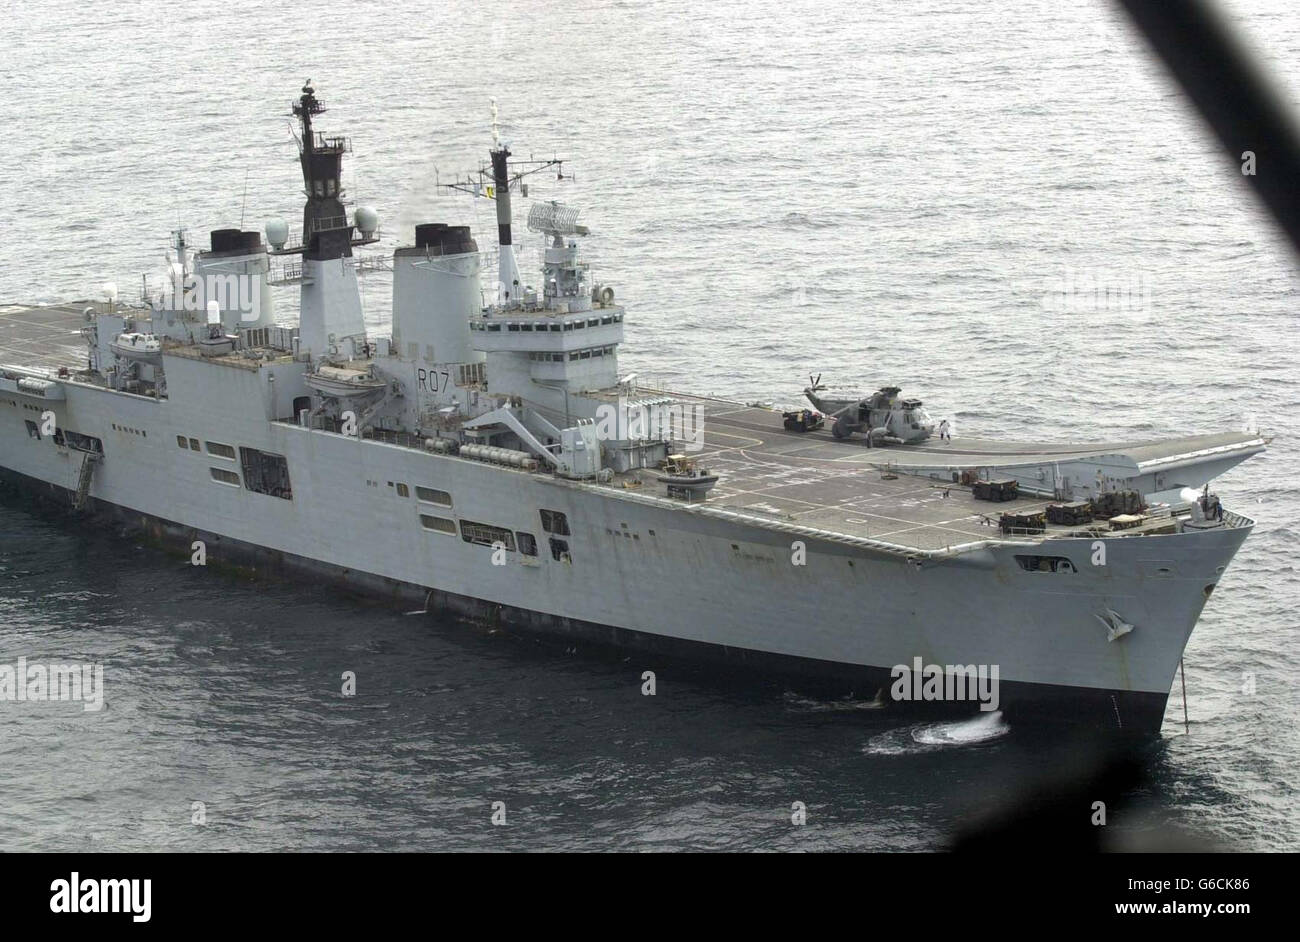 HMS Ark Royal in Mounts Bay, Cornwall. About 300 personnel from three helicopter squadrons flew off the warship to be reunited with loved-ones at RNAS Culdrose, their base at Helston, Cornwall. Among the returning crew were members of 849 A Flight, *..Airborne Surveillance and Control, which lost seven aircrew when two Sea King helicopters collided in mid-air in the Gulf. Personnel from 814 squadron and 820 squadron also left the carrier. The carrier is en-route back to Portsmouth Naval Base, where she is due to arrive. Stock Photo